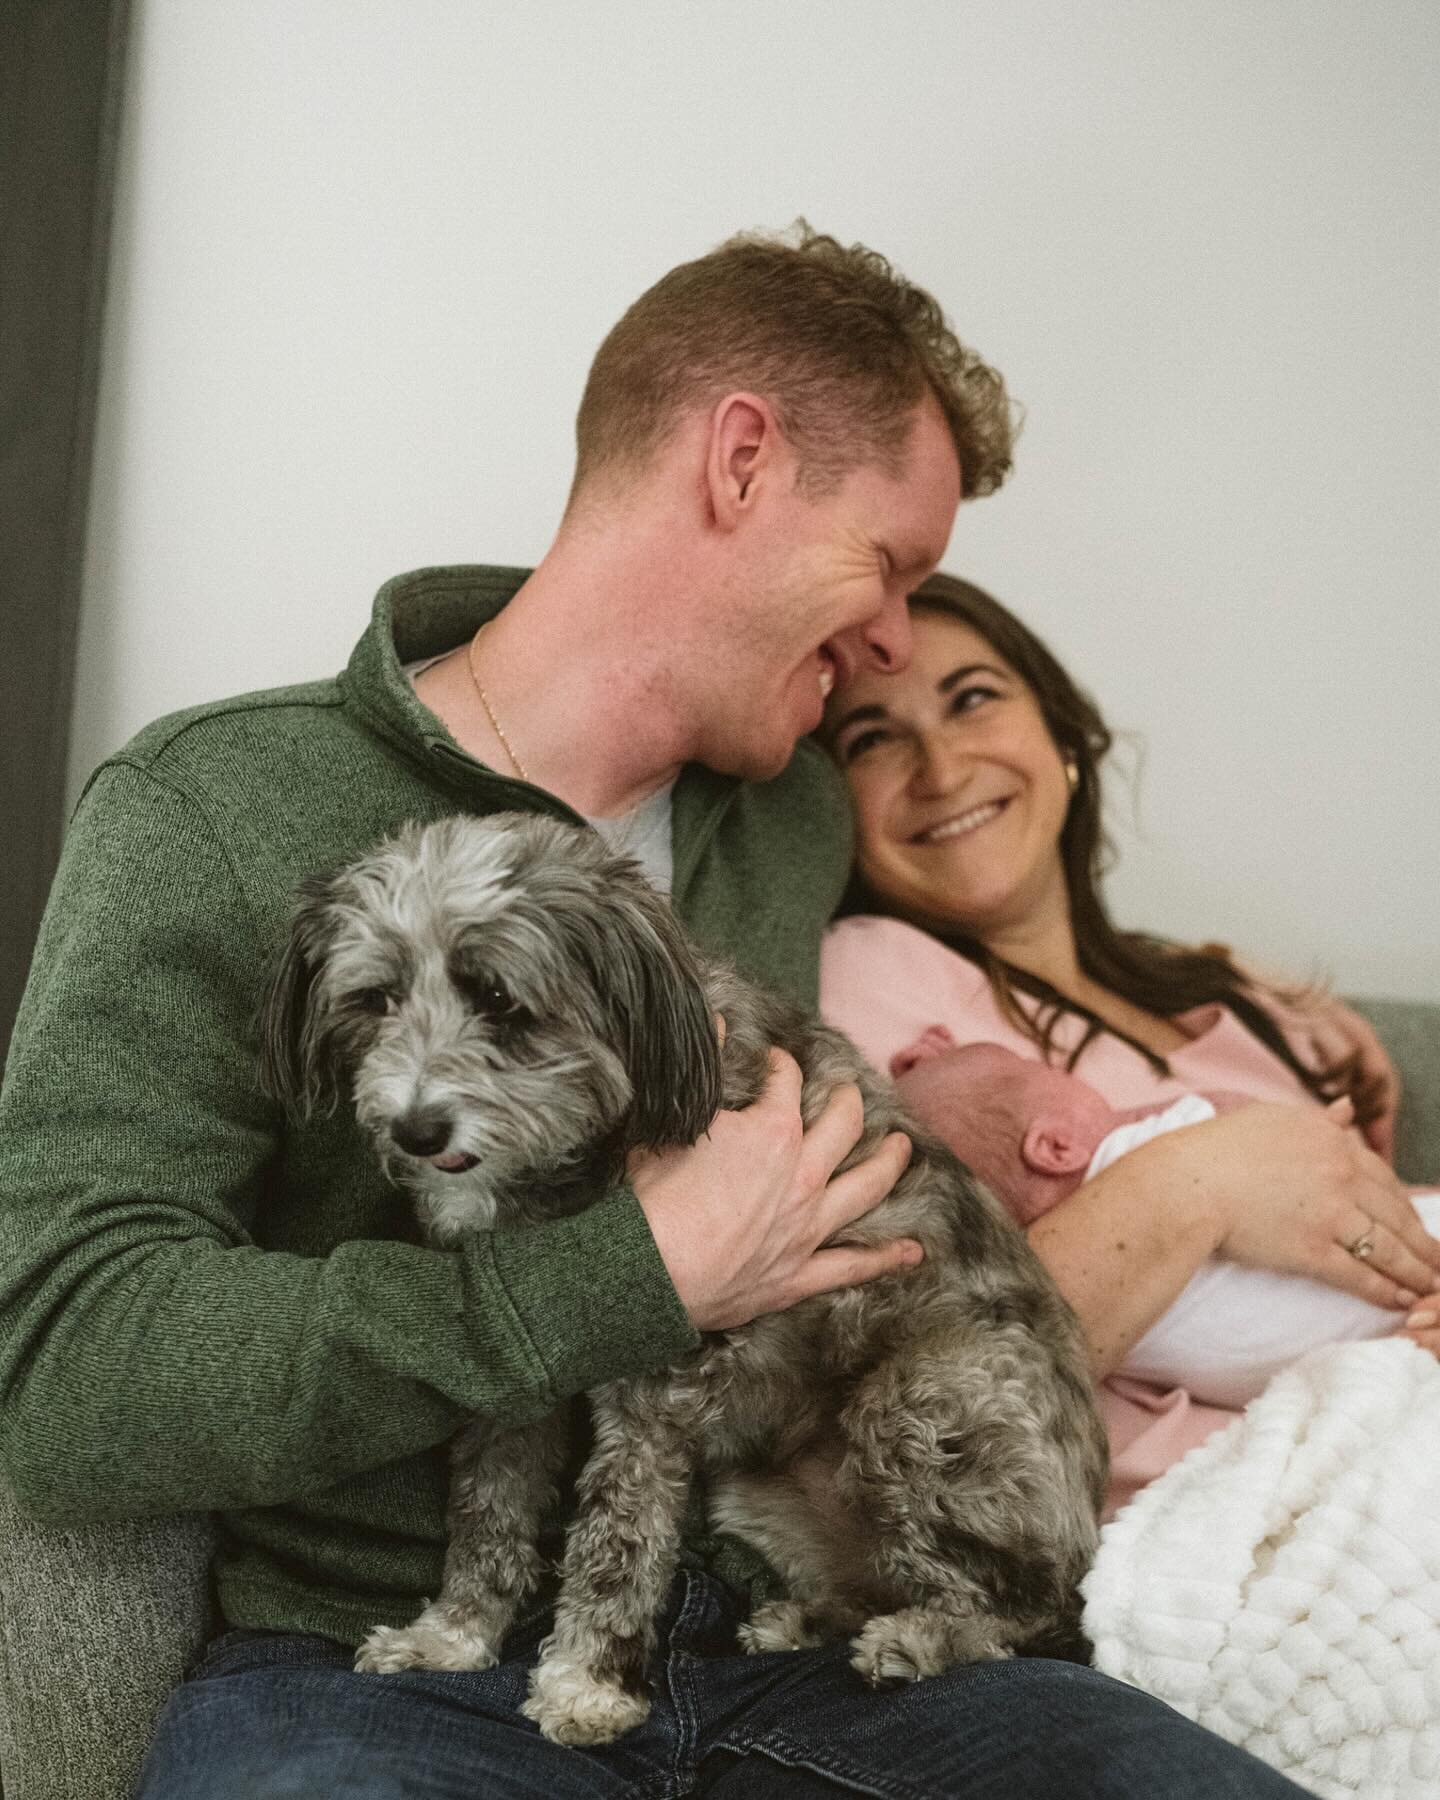 Capturing the sweetest moments of new beginnings. Welcome to the world, baby Jack 🤍

This sweet moment happened as they were getting situated on a little loveseat, Jack was not happy we moved him&mdash; but these amazing new parents laughed at the b